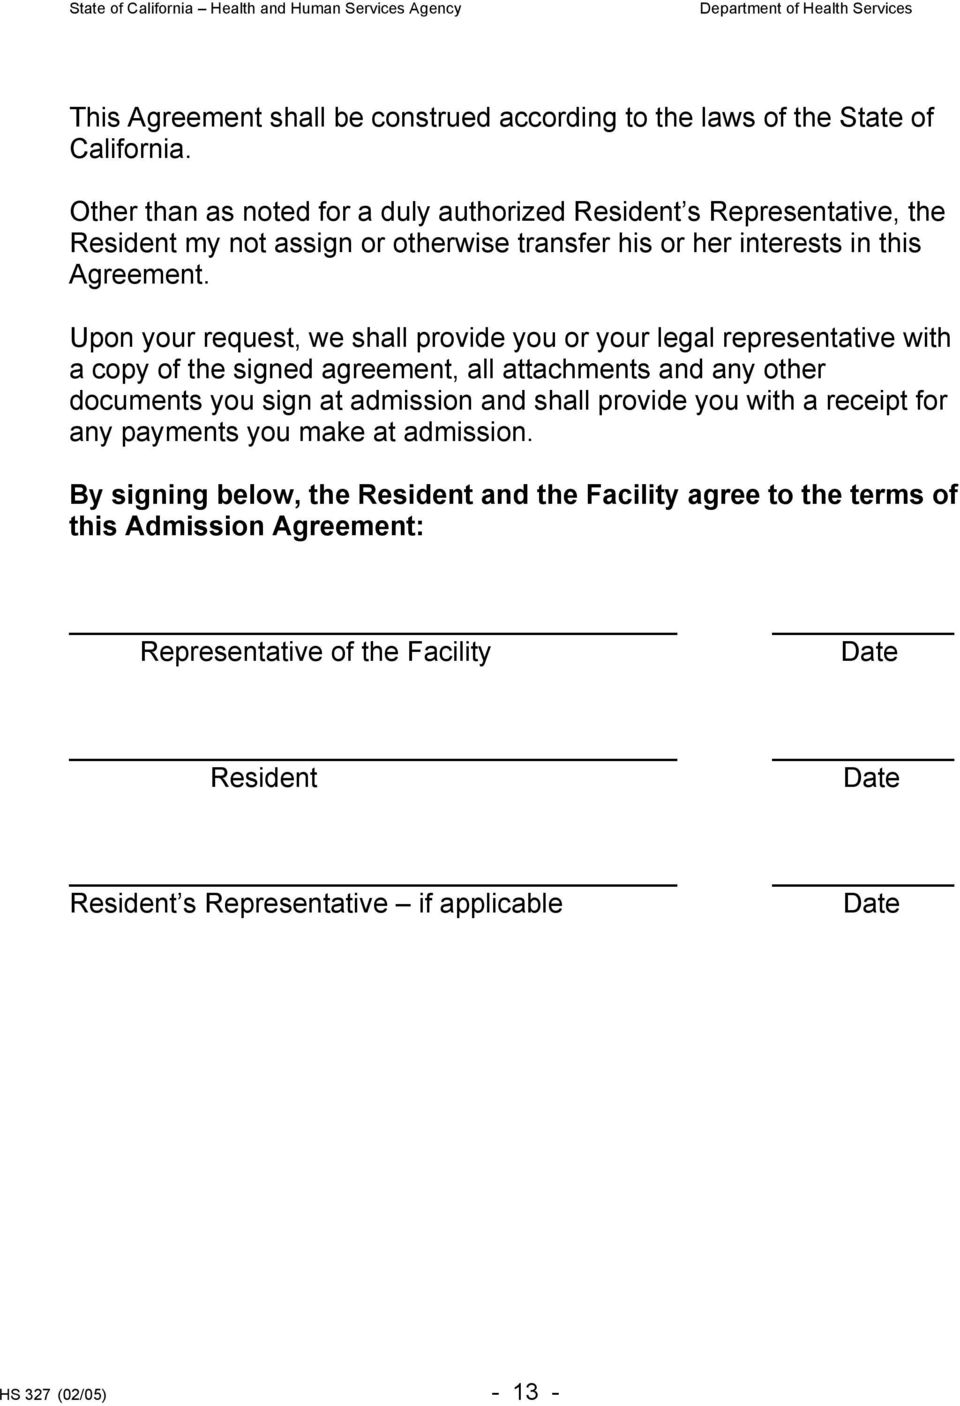 Upon your request, we shall provide you or your legal representative with a copy of the signed agreement, all attachments and any other documents you sign at admission and